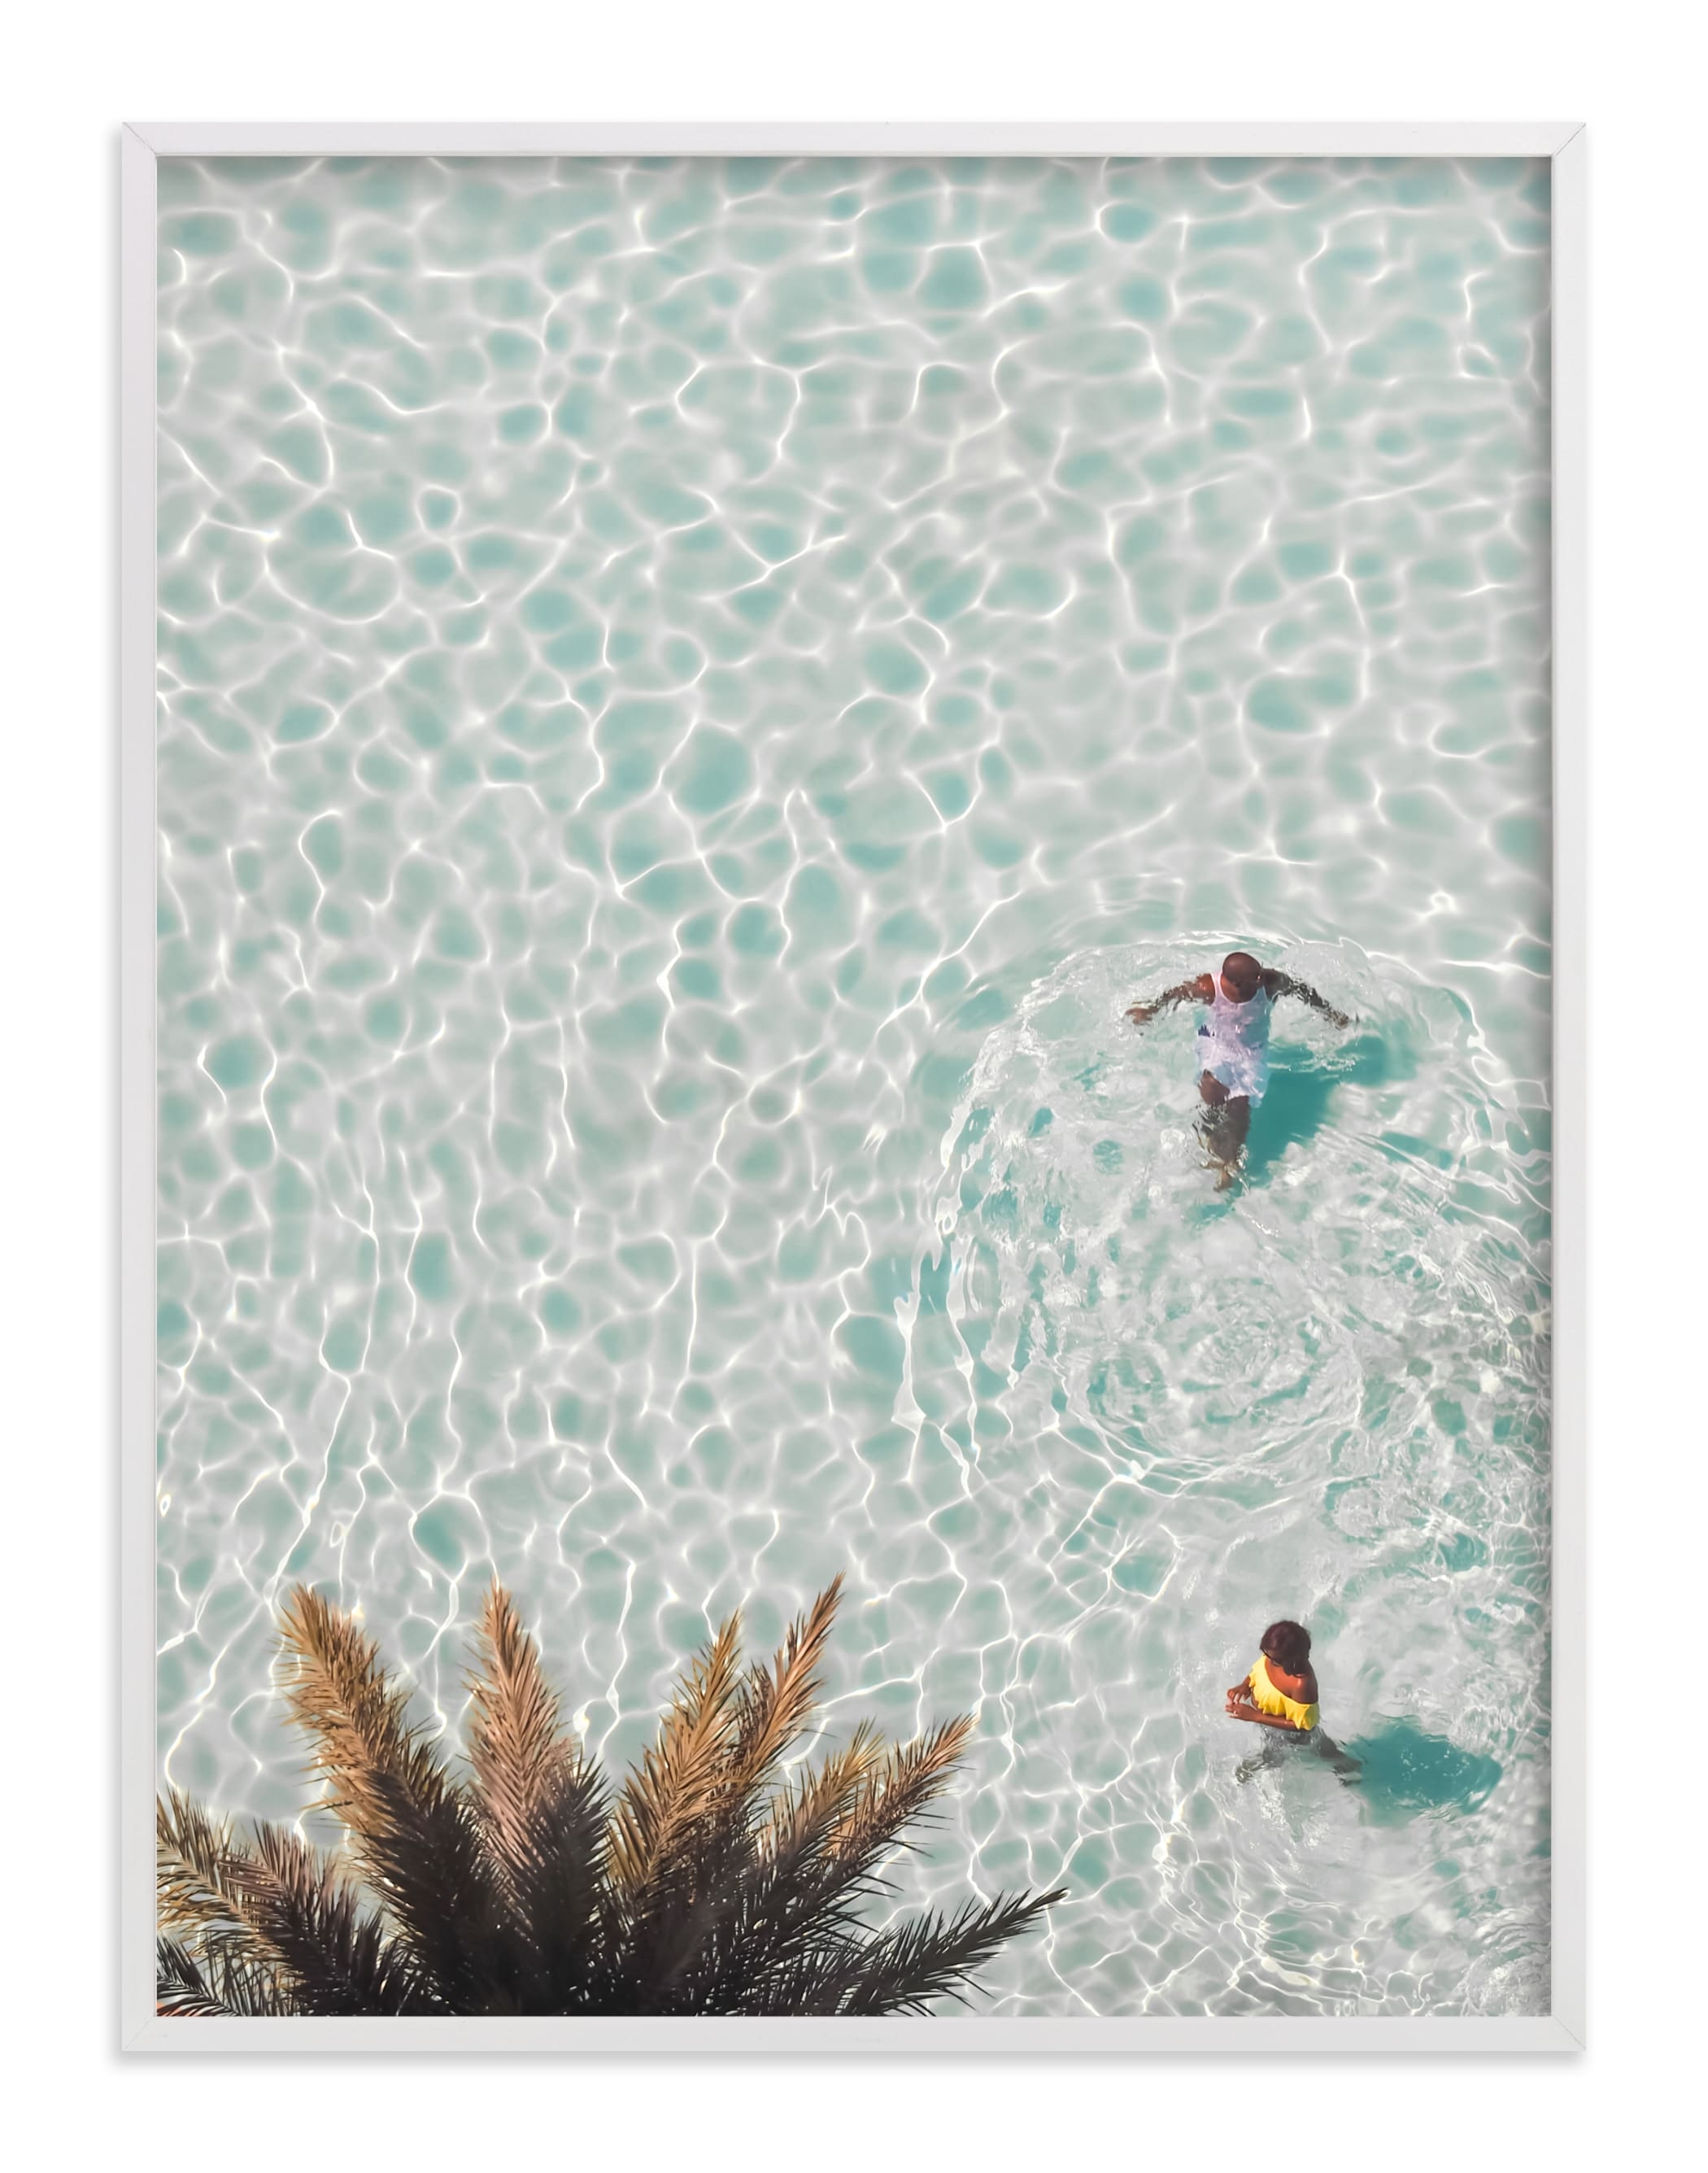 Pool Party for Two  - 30" x 40" - white wood frame - Image 0